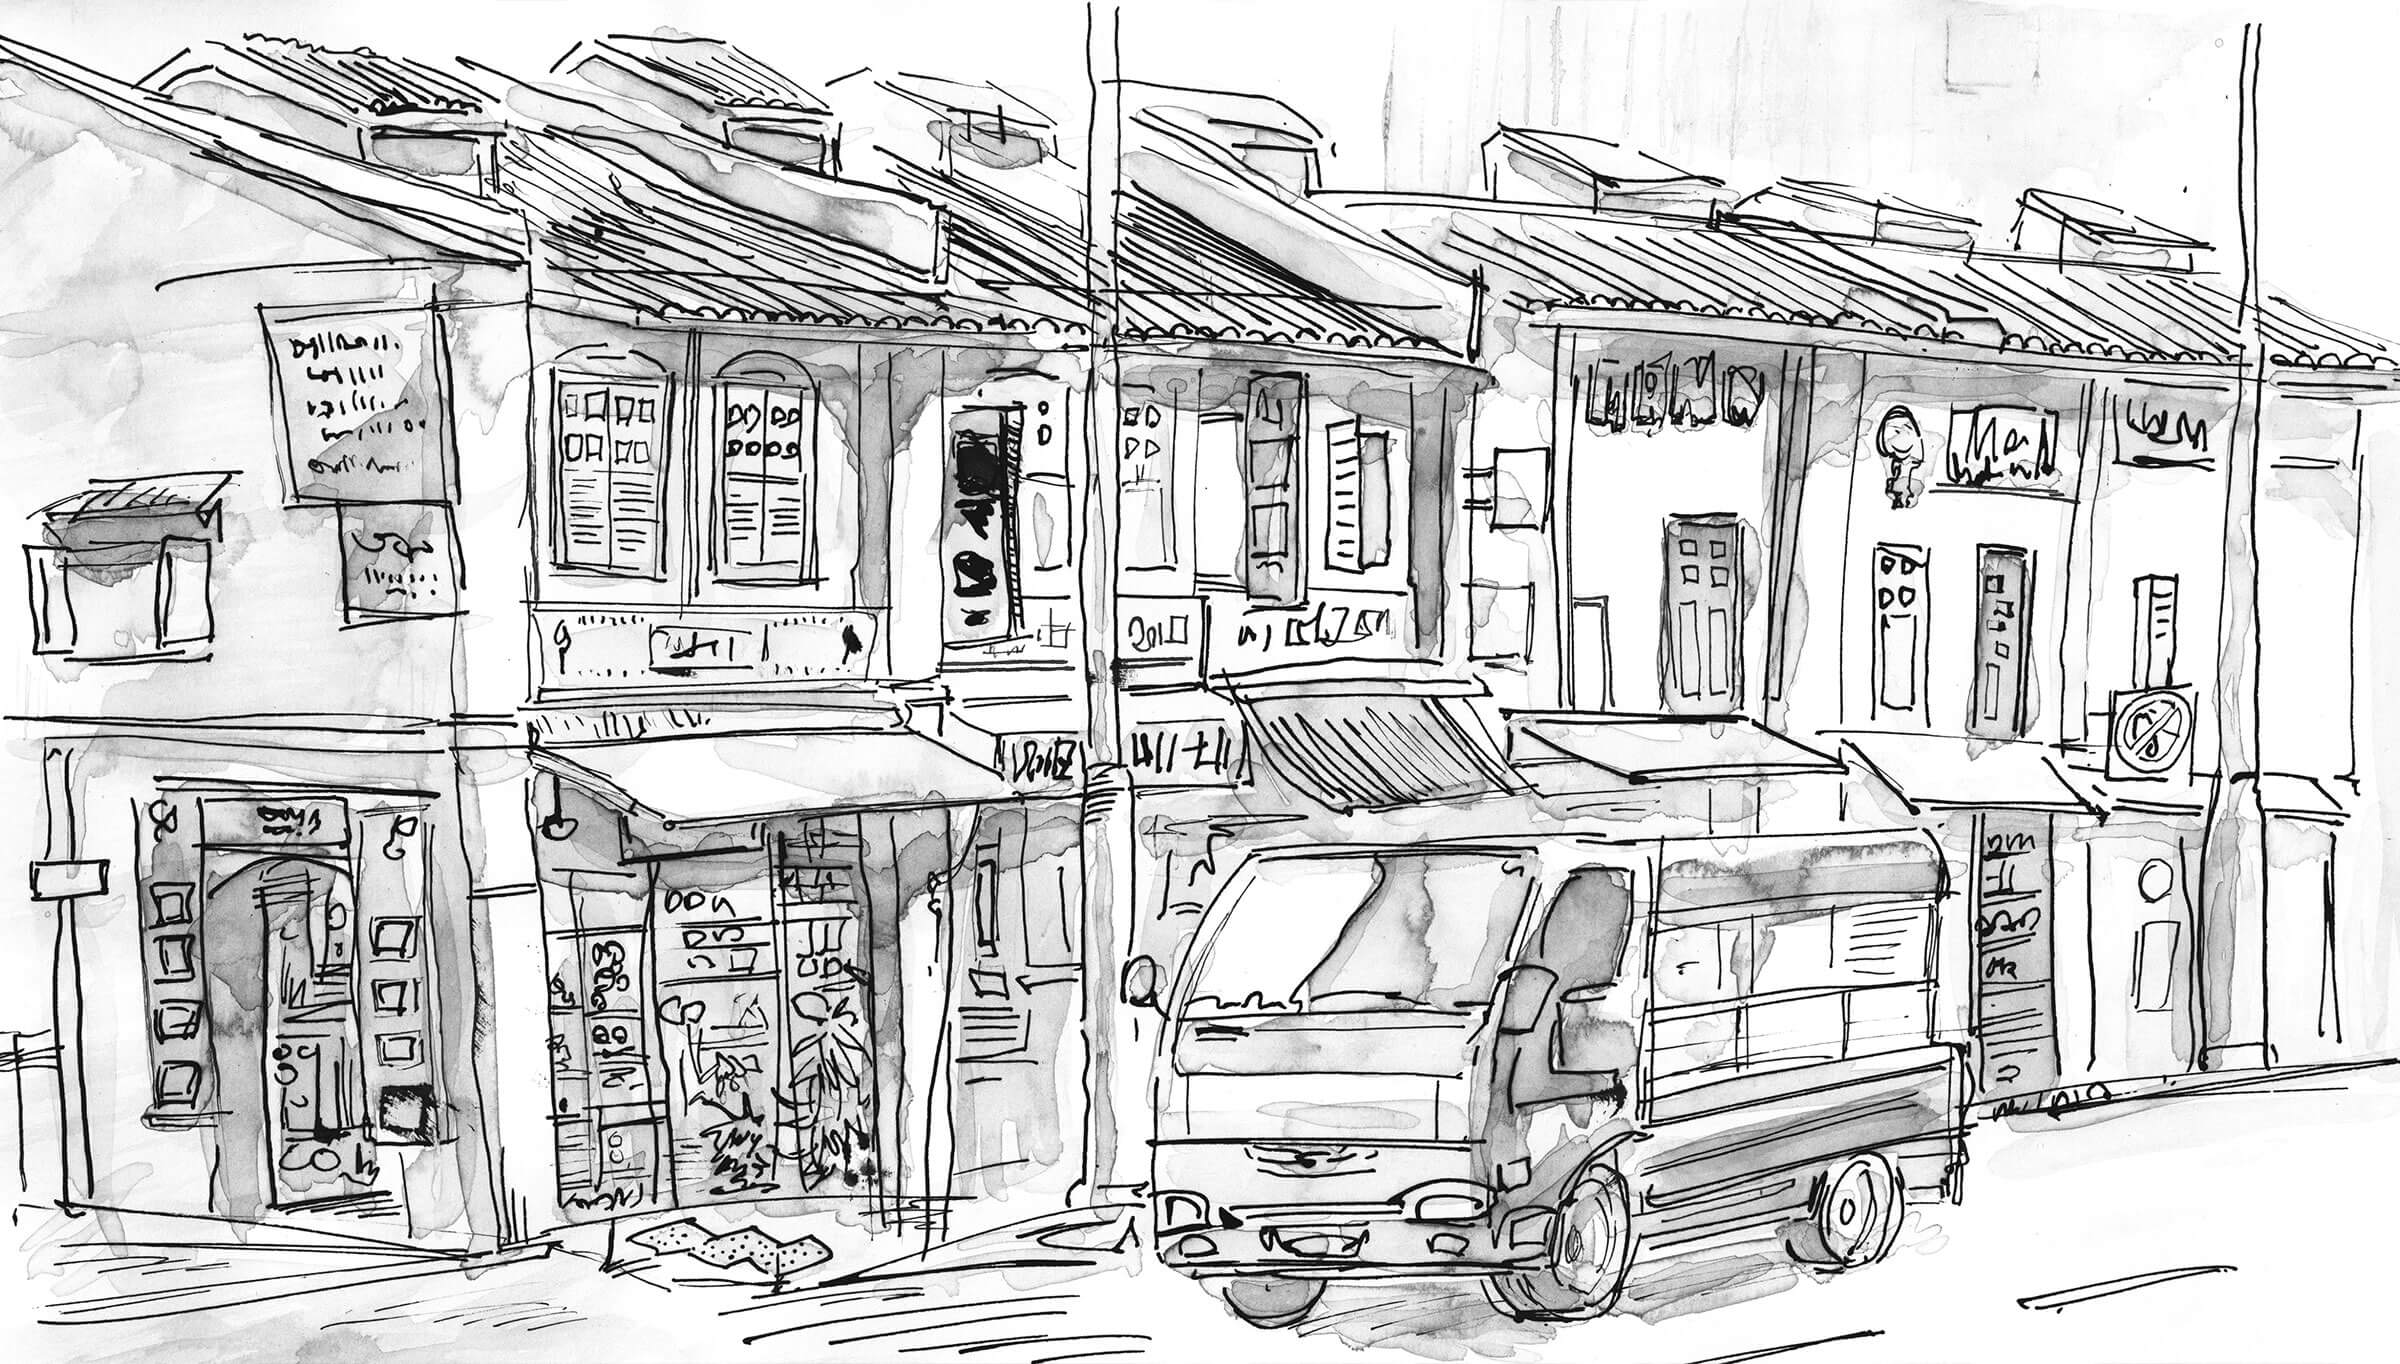 Black-and-white sketch of a van parked next to low-rise buildings.